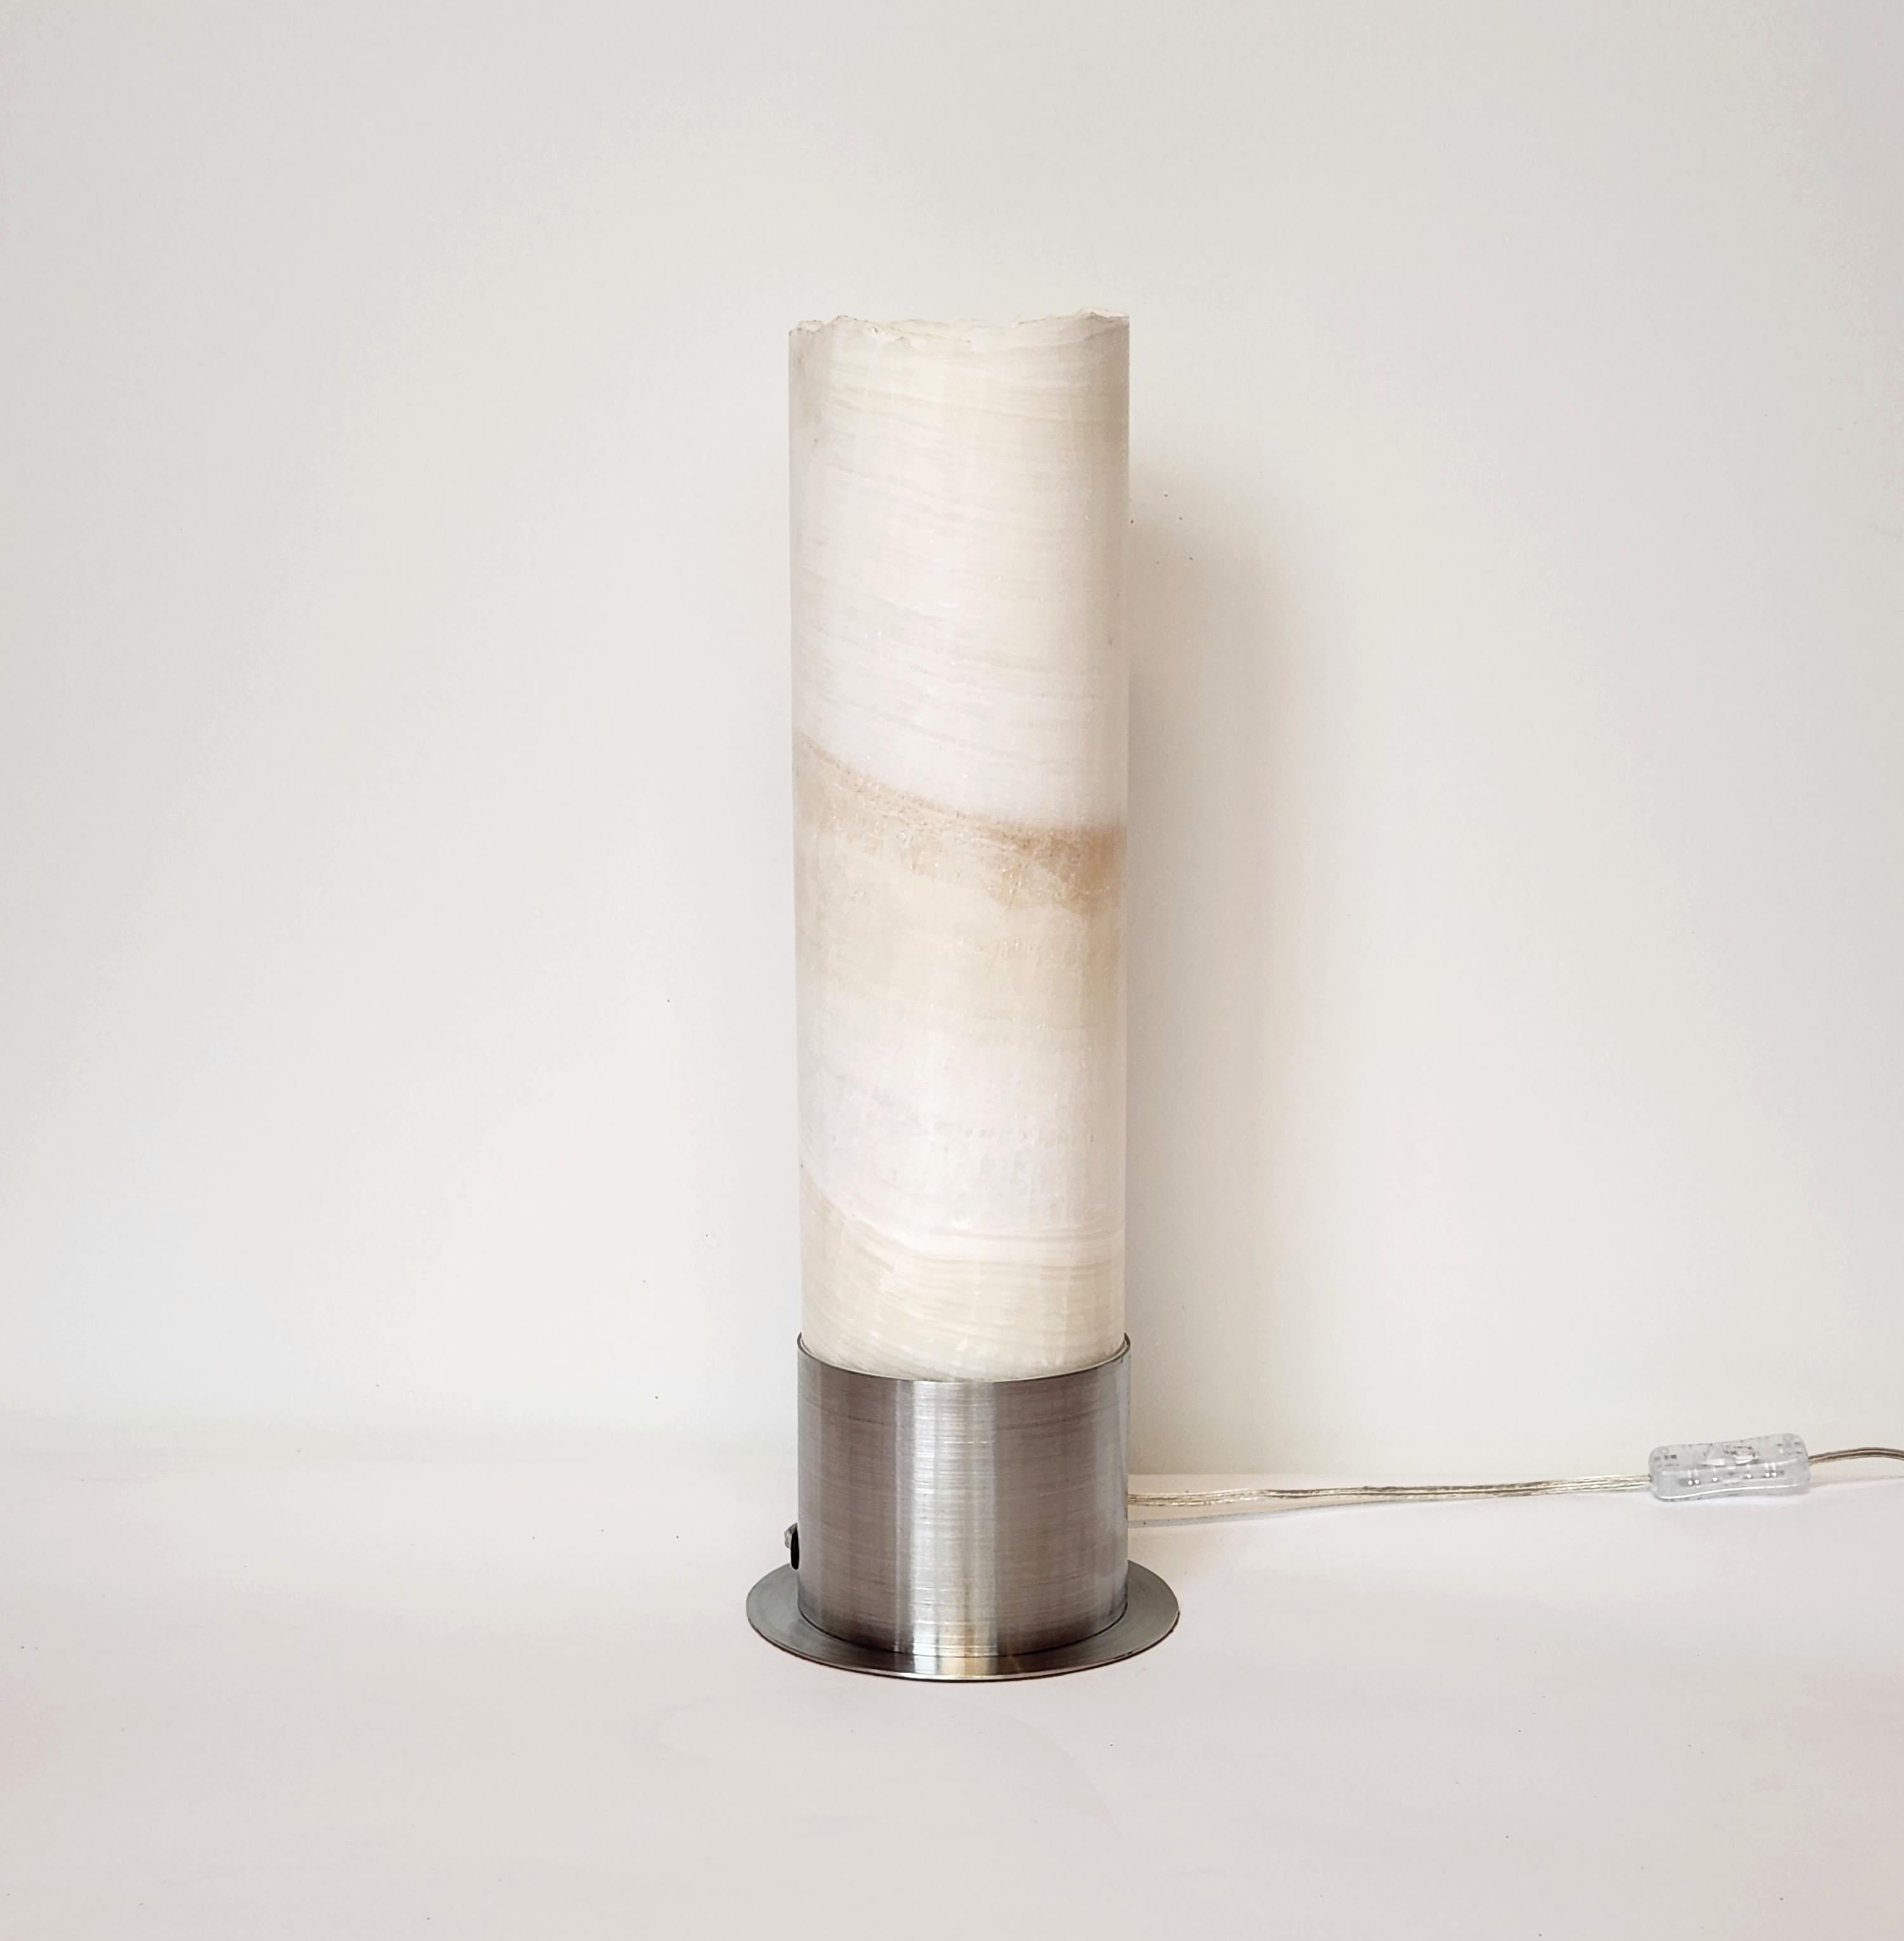 Ambient White Onyx Table Lamp with Leather-Backed Stainless Steel Base In New Condition For Sale In Stratford, CT